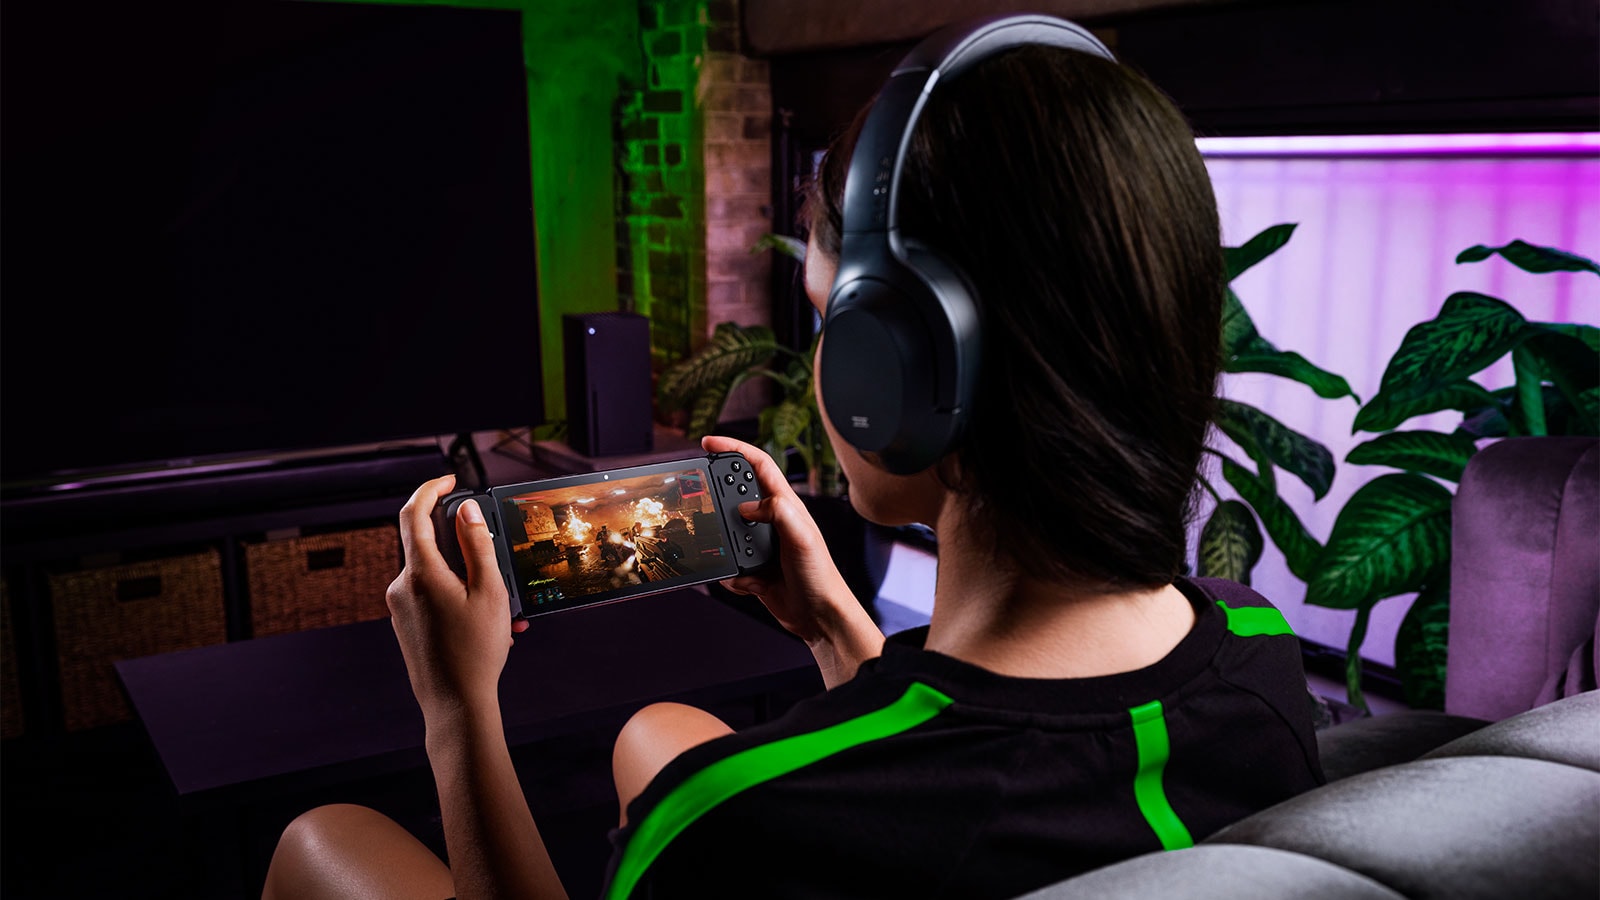 The Razer Edge 5G puts thousands of games at your fingertips